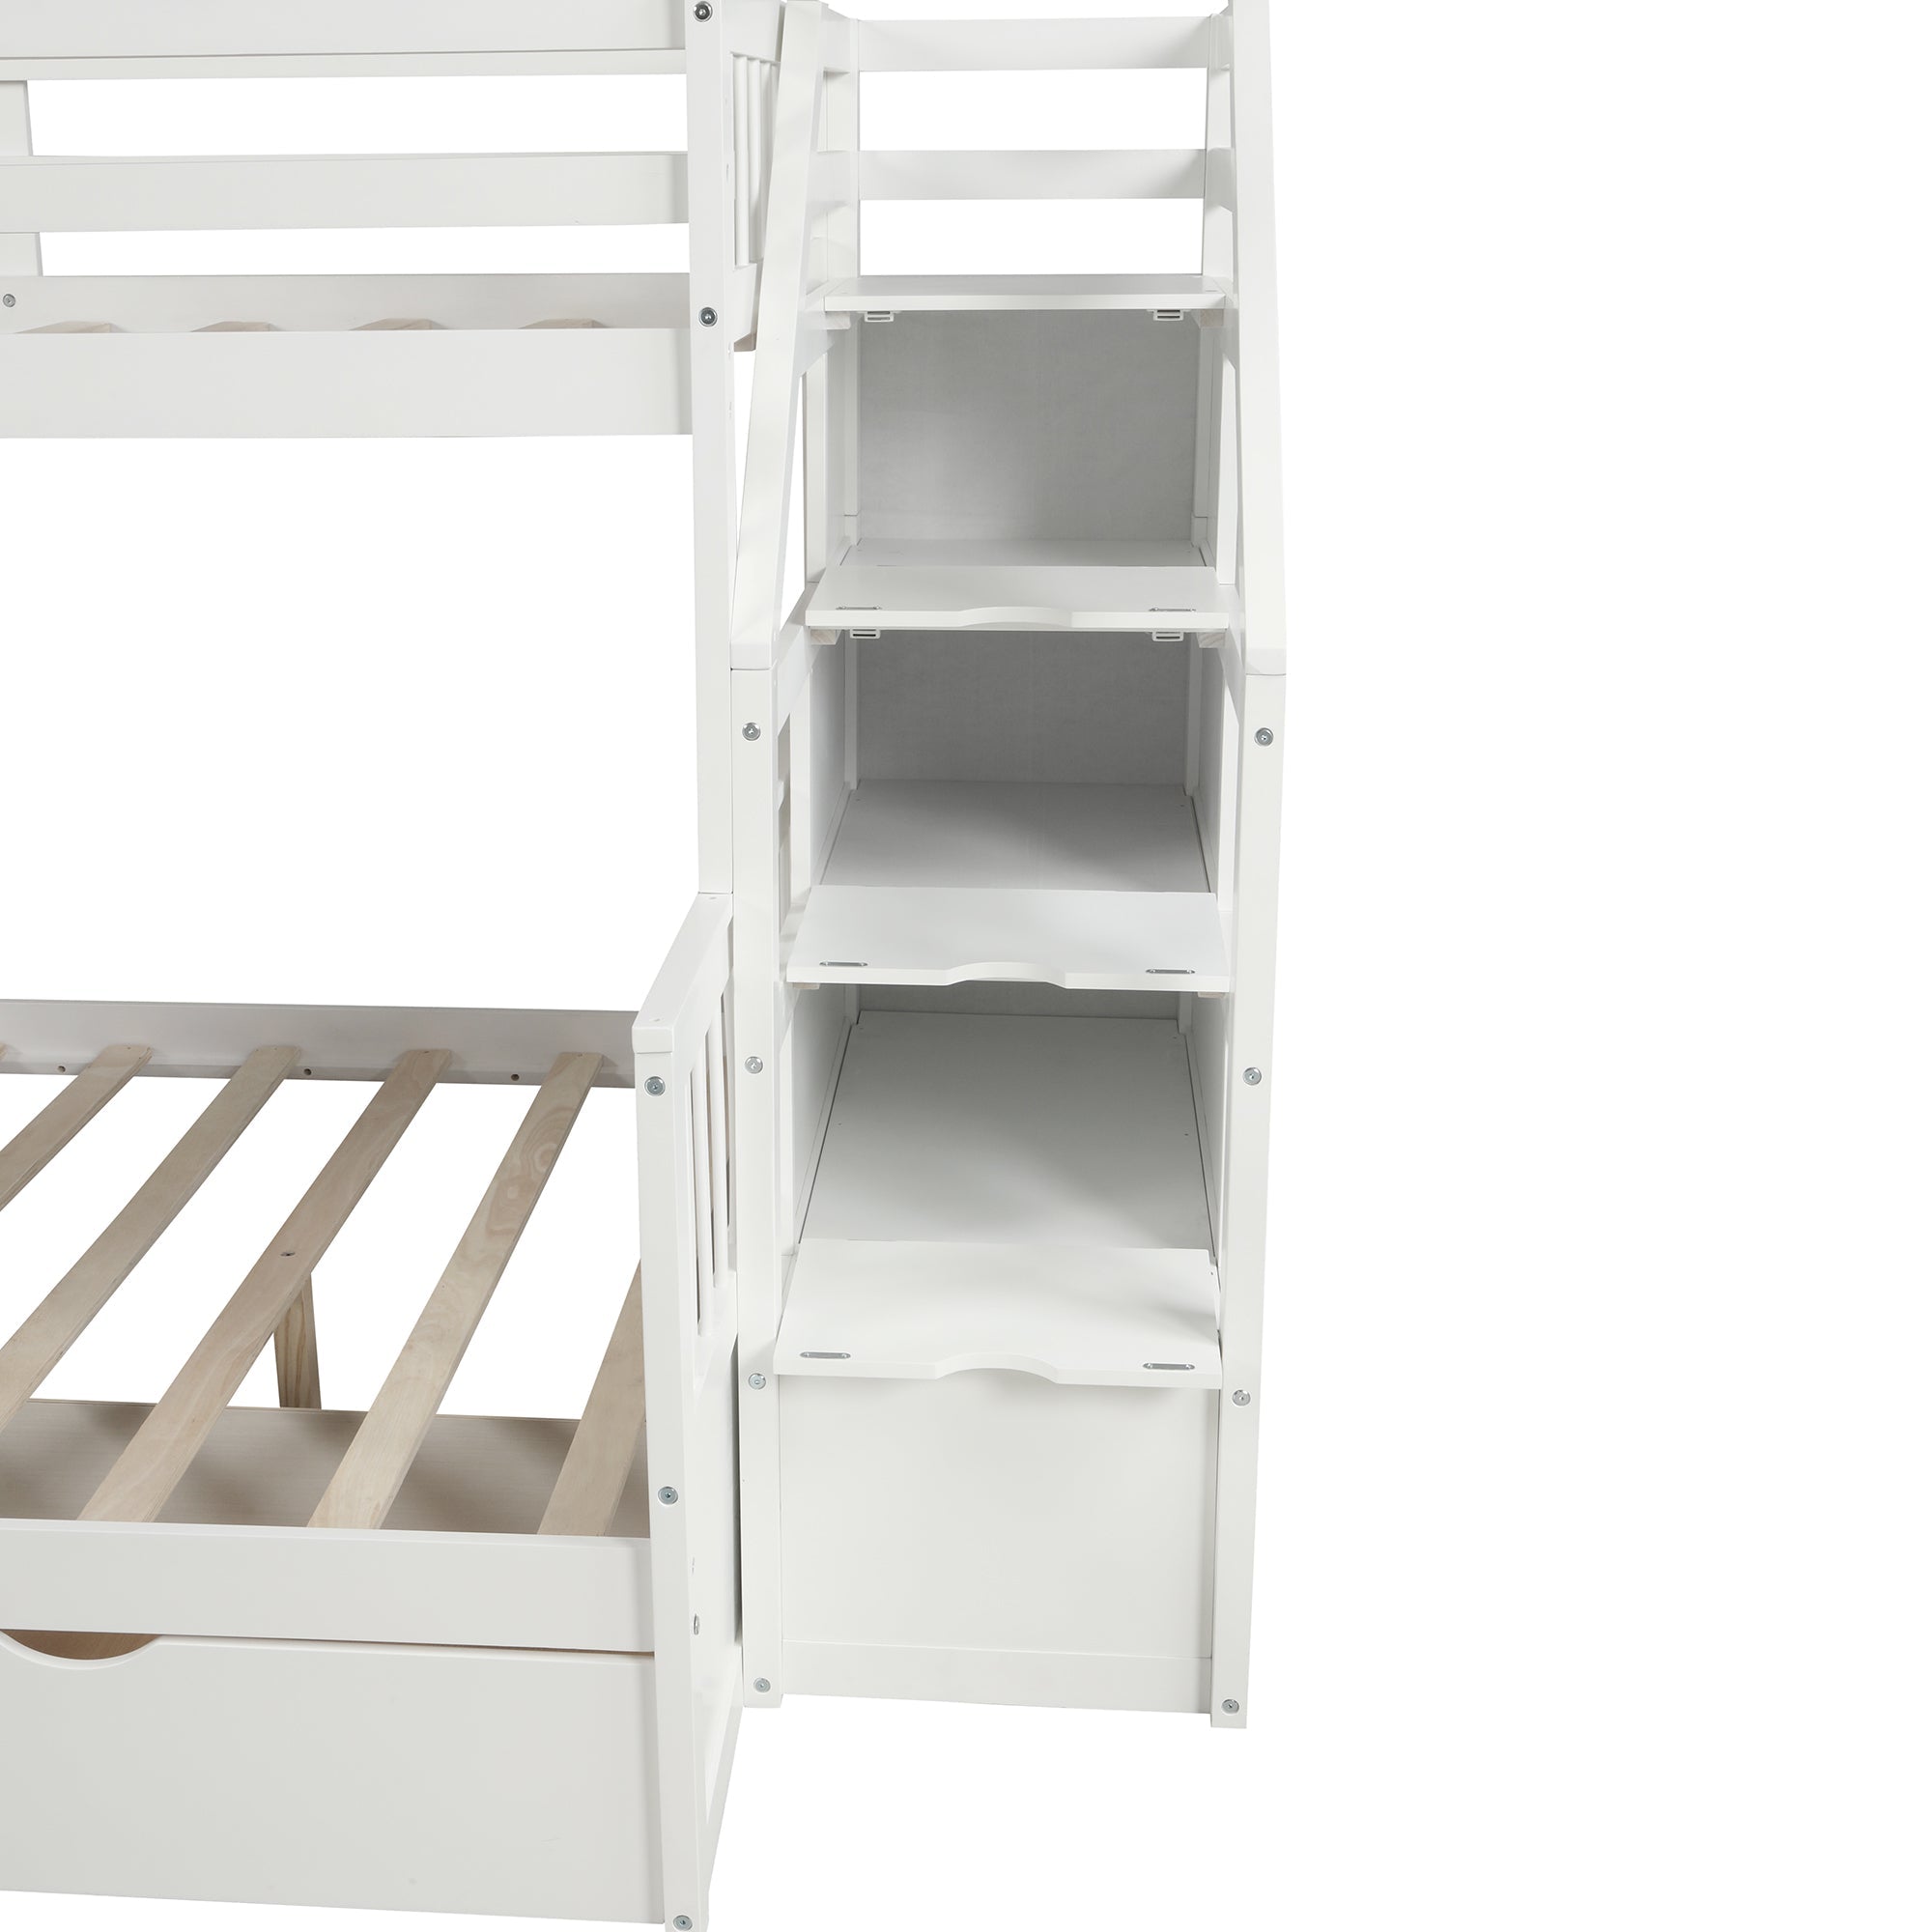 Bellemave Twin Over Full Bunk Bed with Stairs and Slide, Solid Wood Bunk Bed Frame with Storage Drawers for Kids Boys Girls Teens （White)